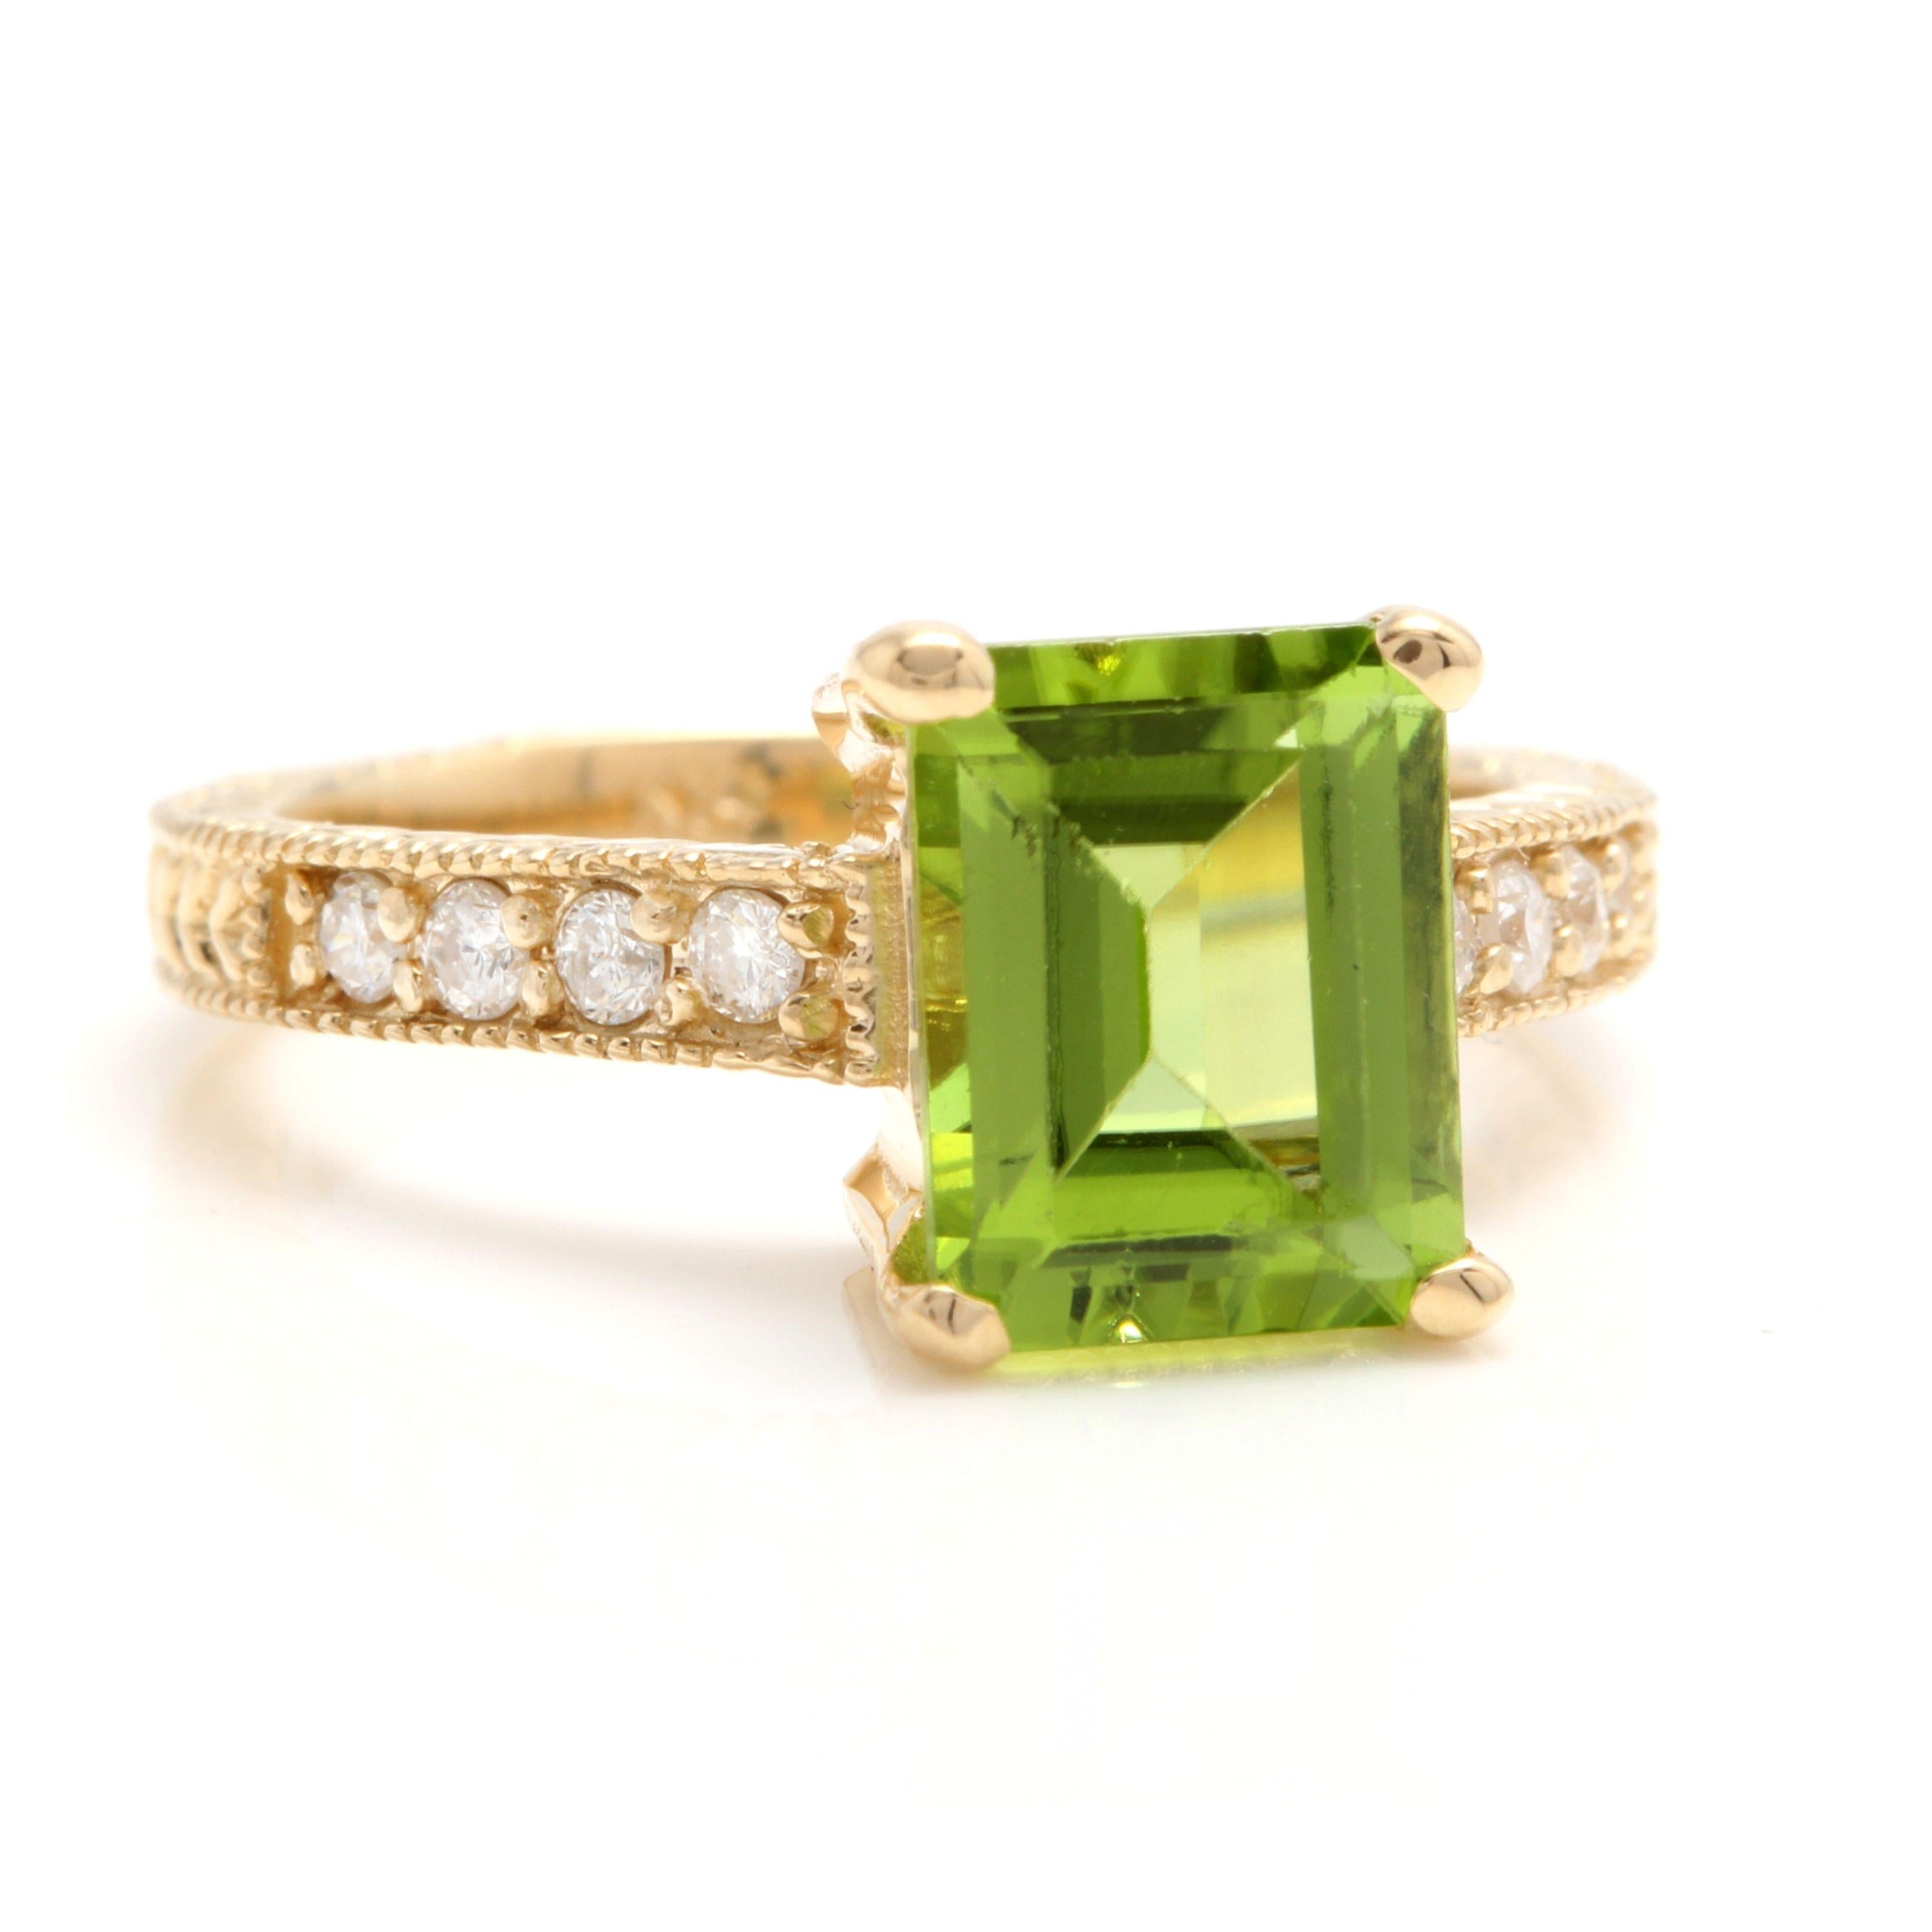 3.20 Carats Impressive Natural Peridot and Diamond 14K Yellow Gold Ring

Total Natural Peridot Weight is: Approx. 3.00 Carats

Peridot Measures: Approx. 9.00 x 7.00mm

Natural Round Diamonds Weight: Approx. 0.20 Carats (color G-H / Clarity